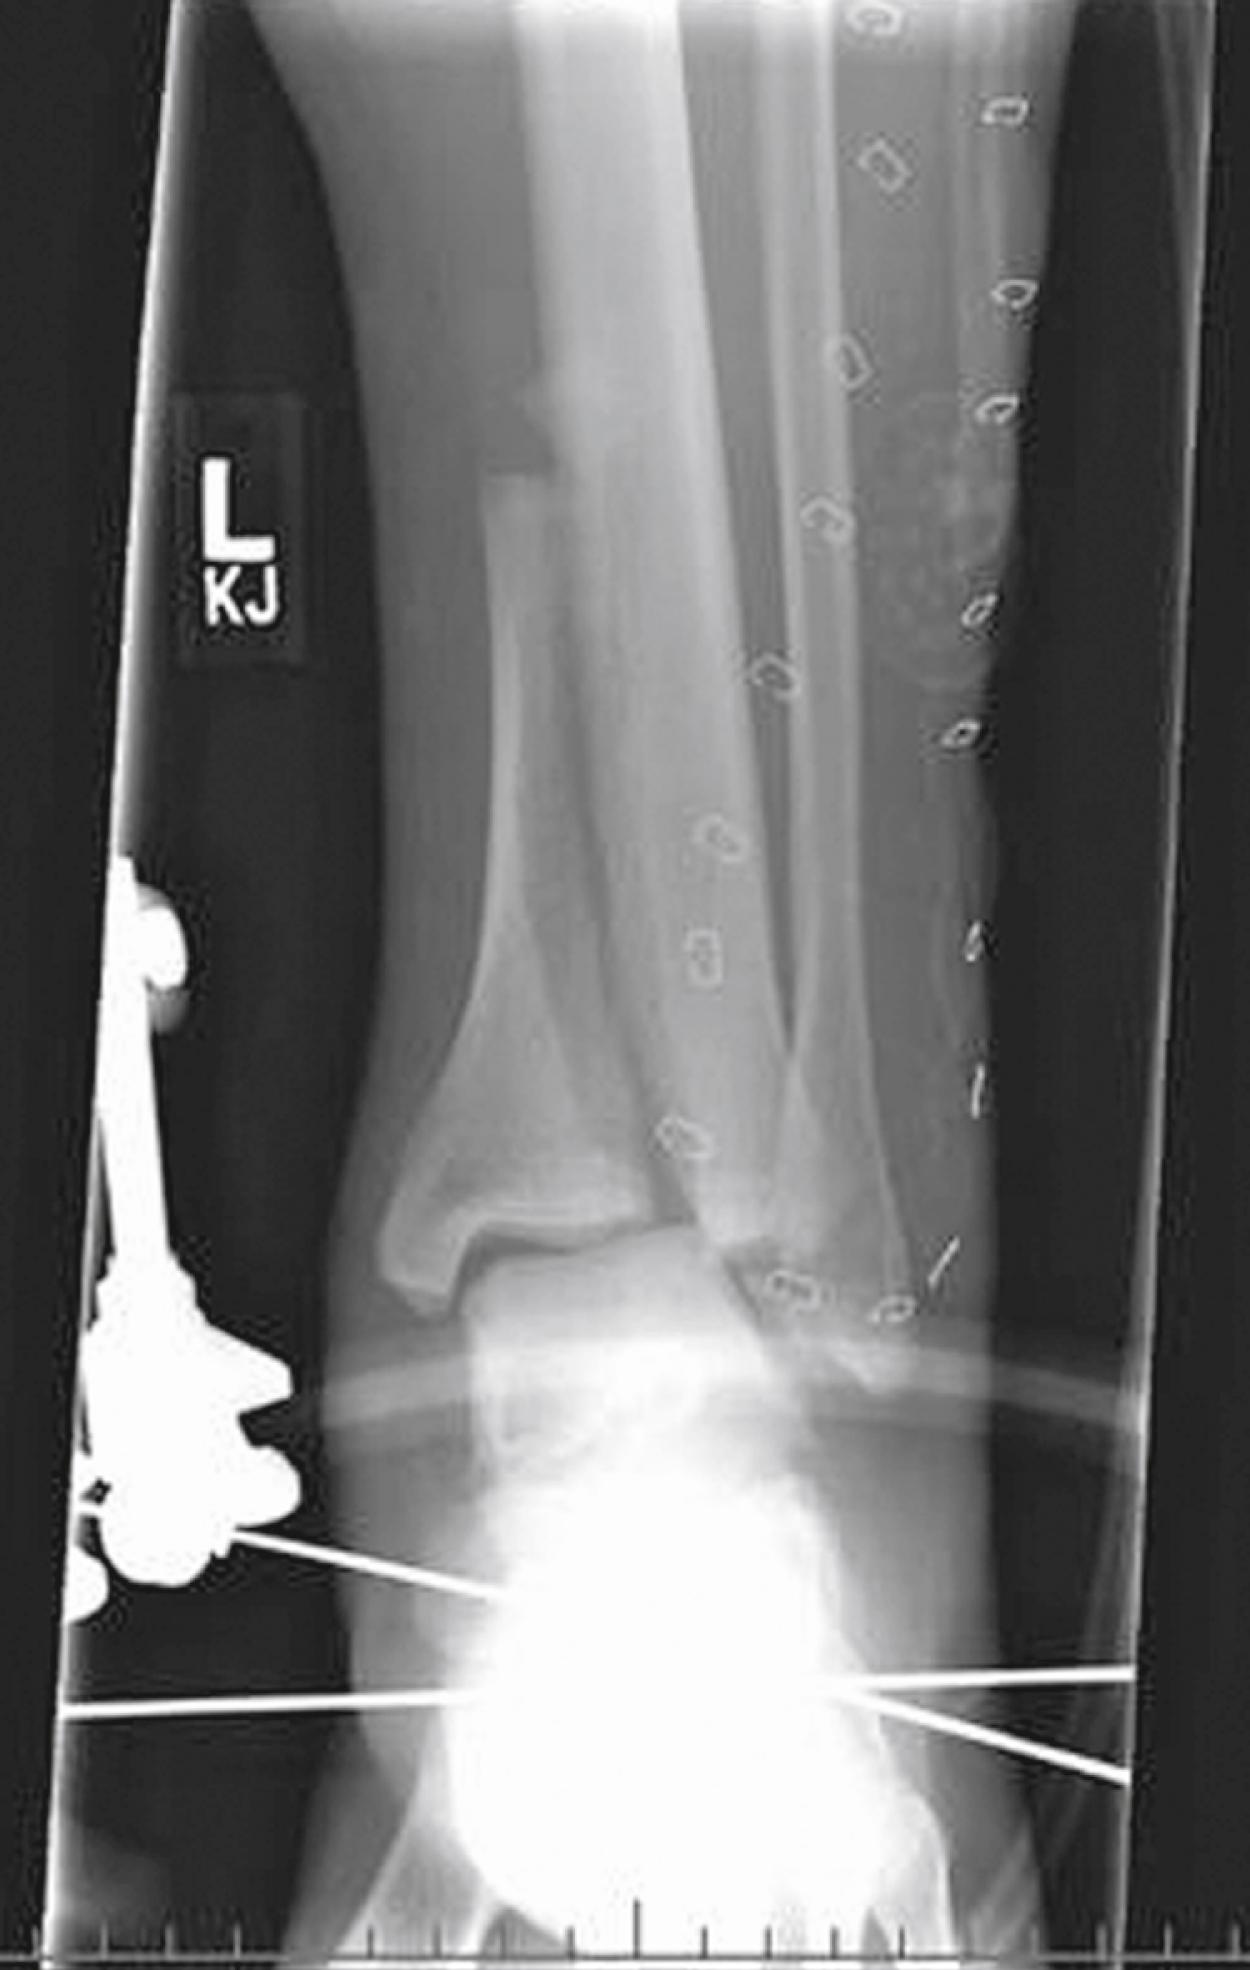 Fig. 22.19, Longitudinal fracture. During a motocross competition this teenager missed a jump and was thrown 20 feet in the air, then fell to the pavement below, landing directly on his foot. The force of the impact was transmitted upward through his ankle, resulting in this vertical tibia fracture.